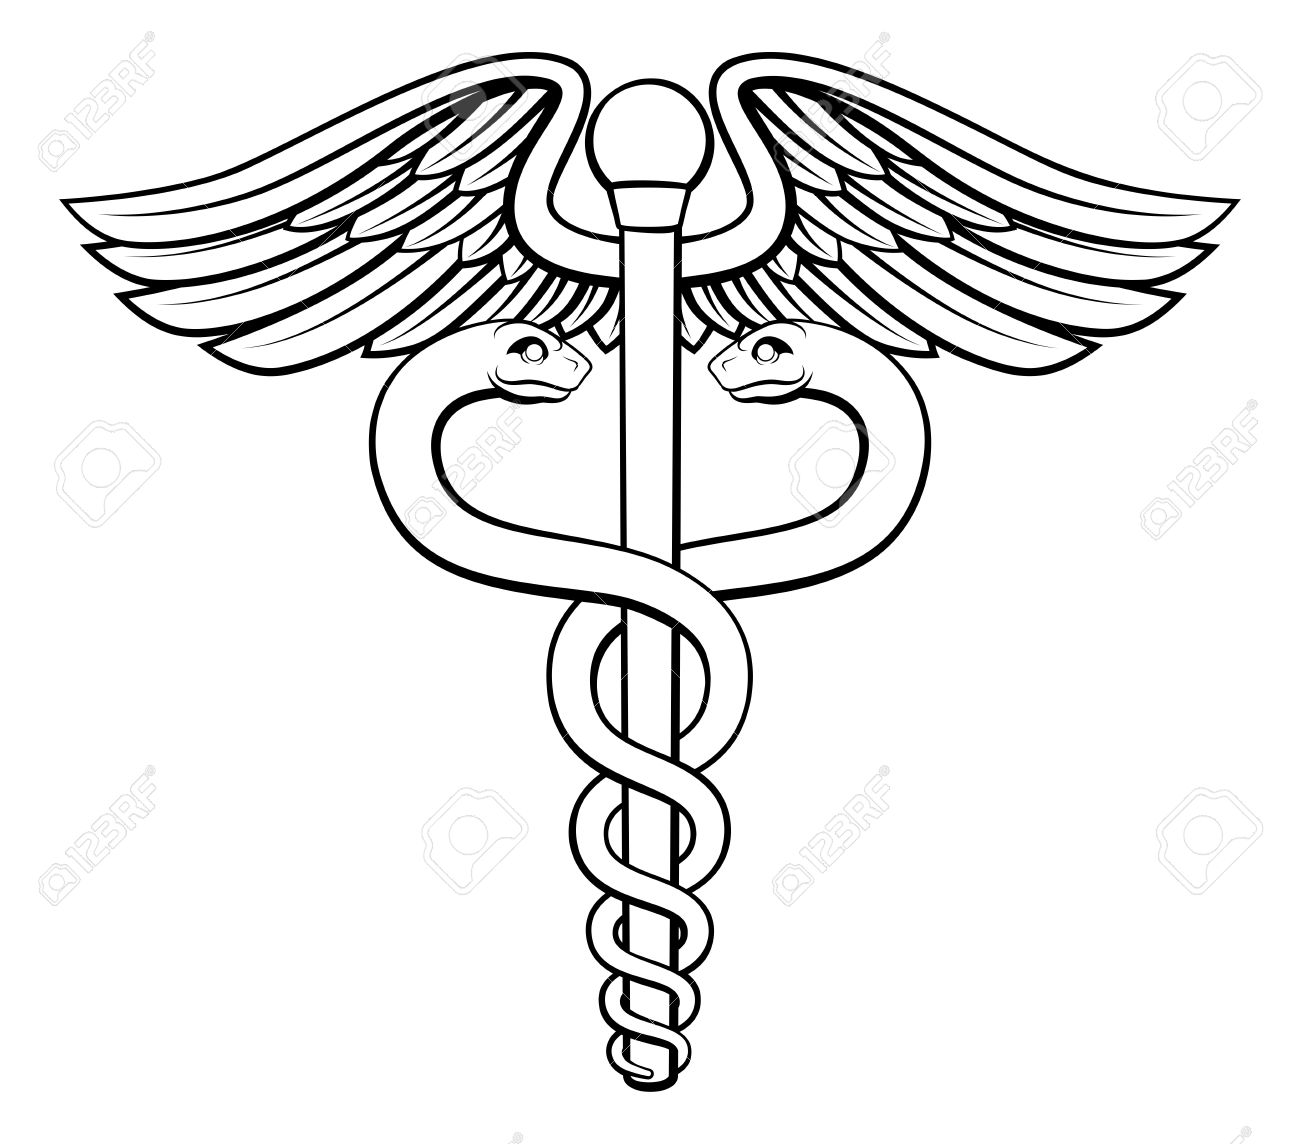 The best free Caduceus drawing images. Download from 79 free drawings ...